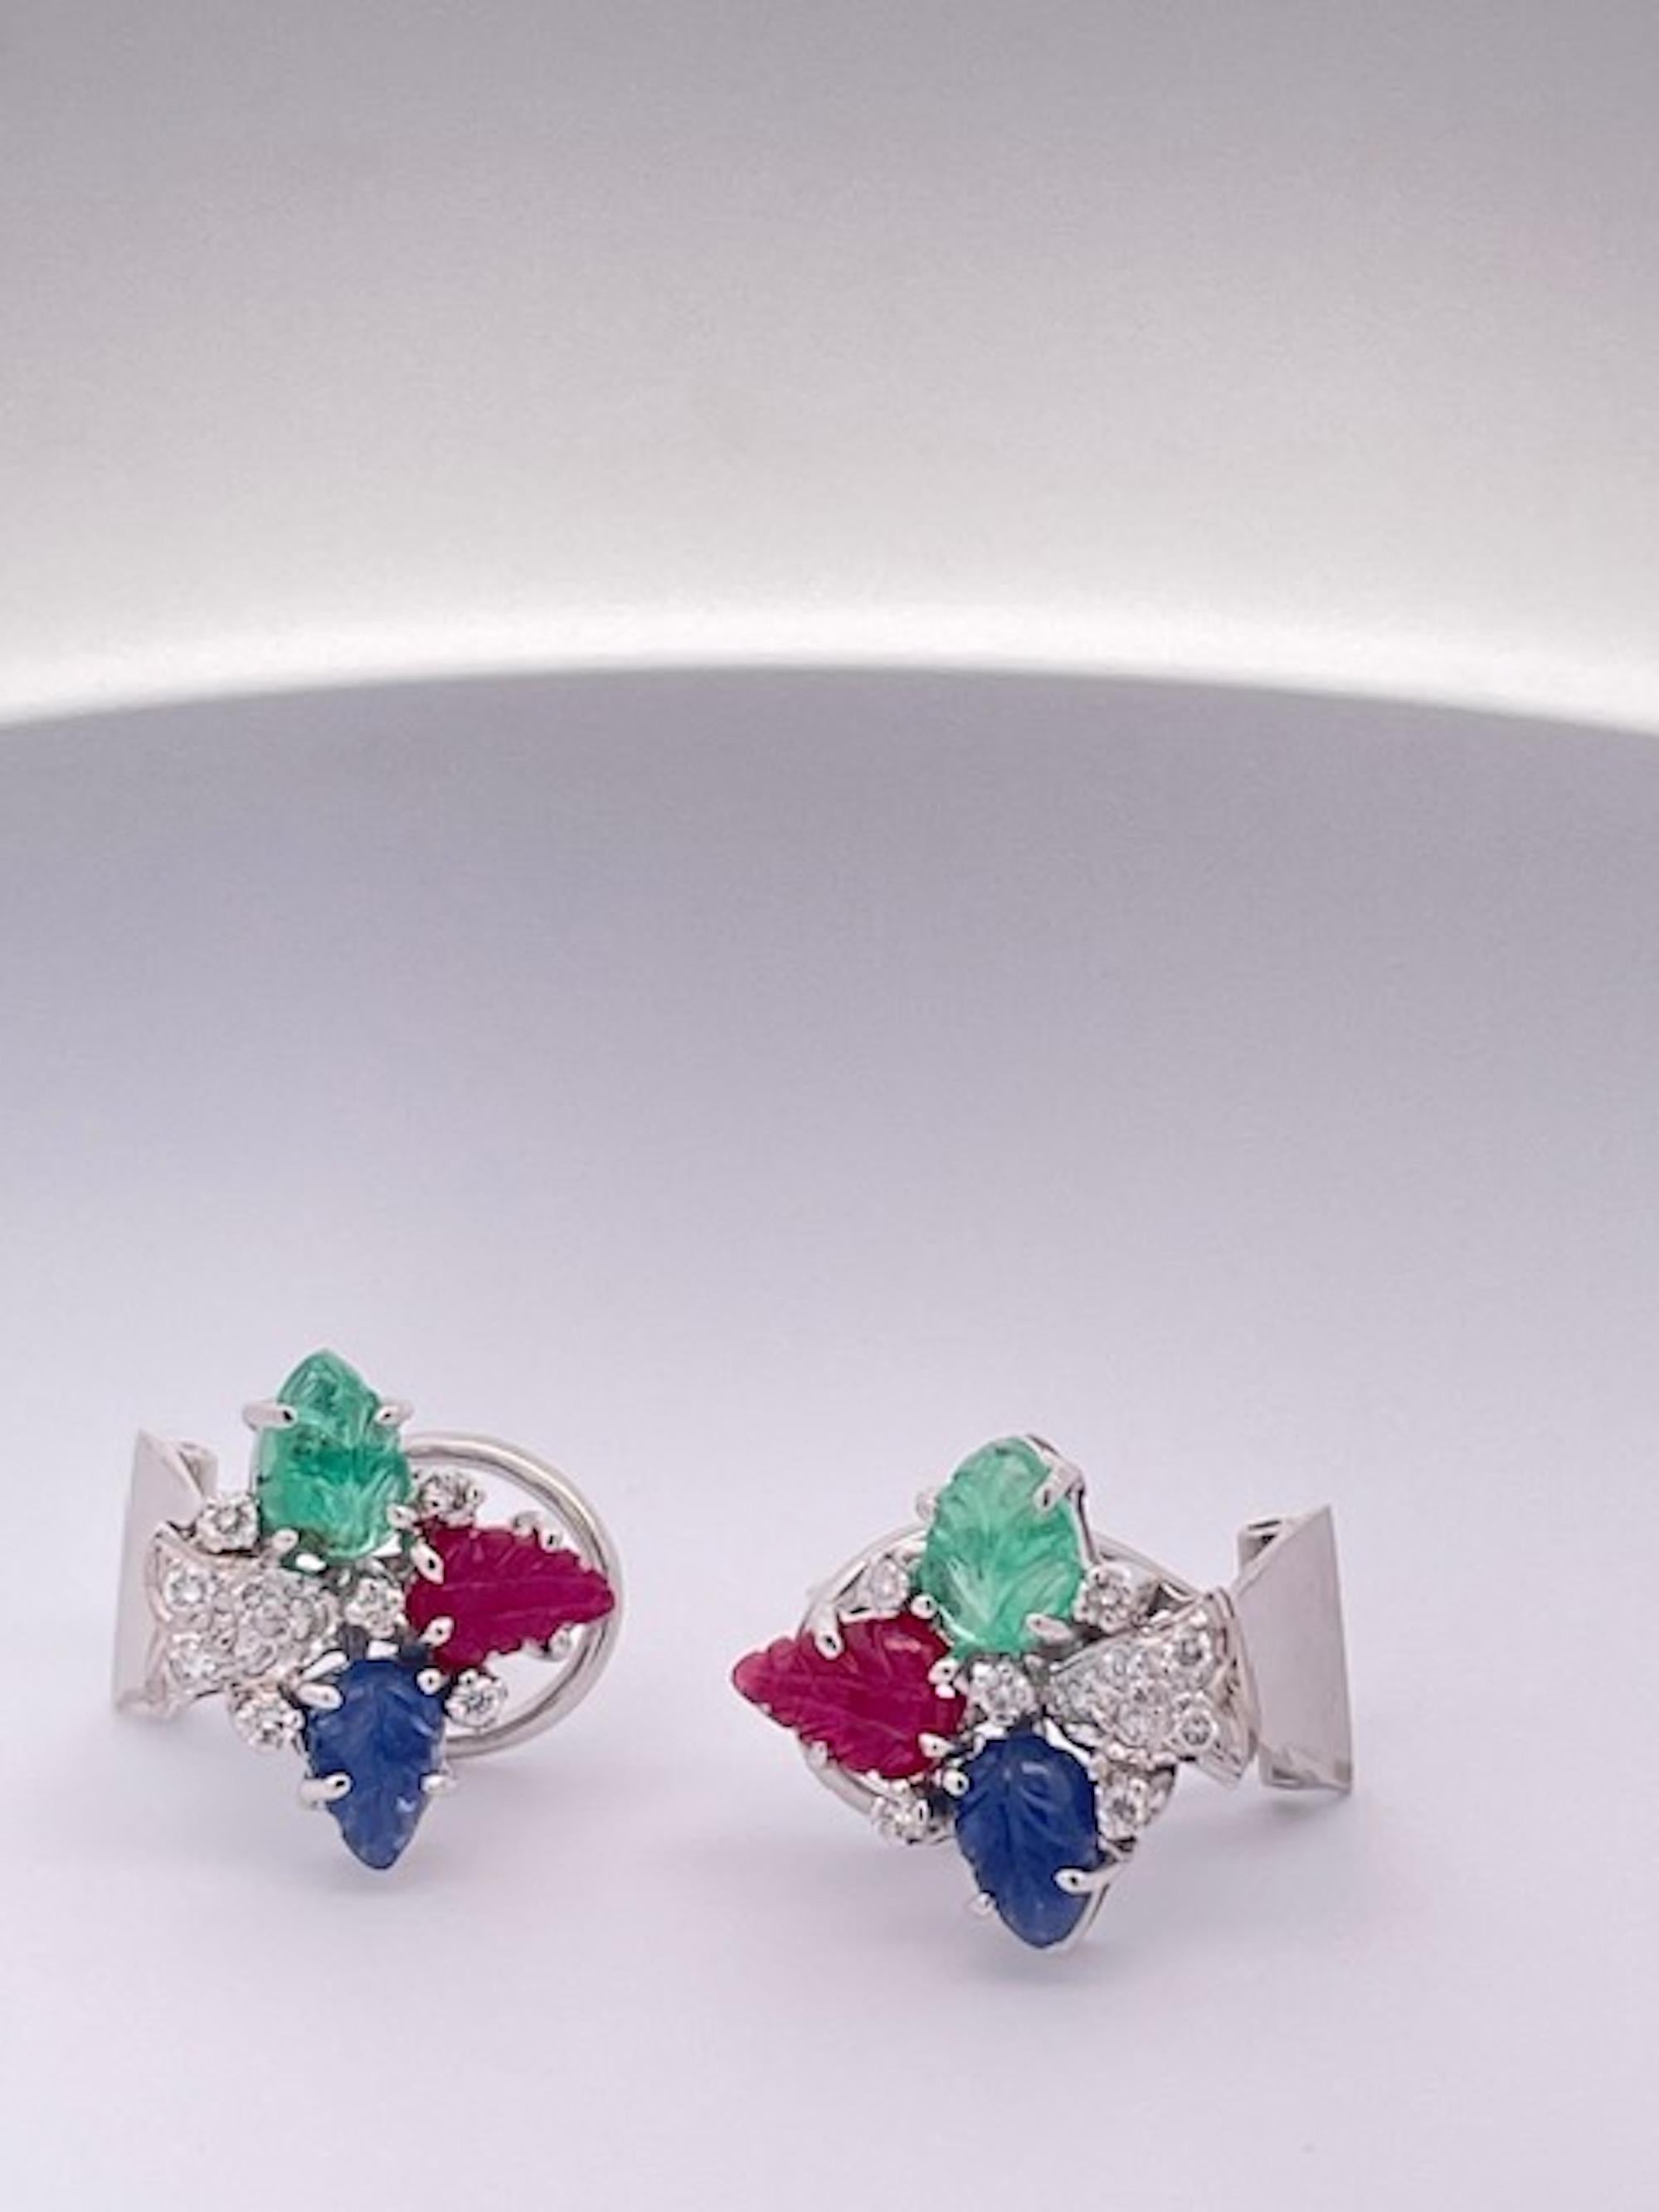 These Tutti Frutti in Earrings 18K White Gold are a beautiful match to both Tutti Frutti Bracelets that I have listed.  They also match several Tutti Frutti rings I have listed. They are simple but when you have a large Tutti Frutti Bracelet you do